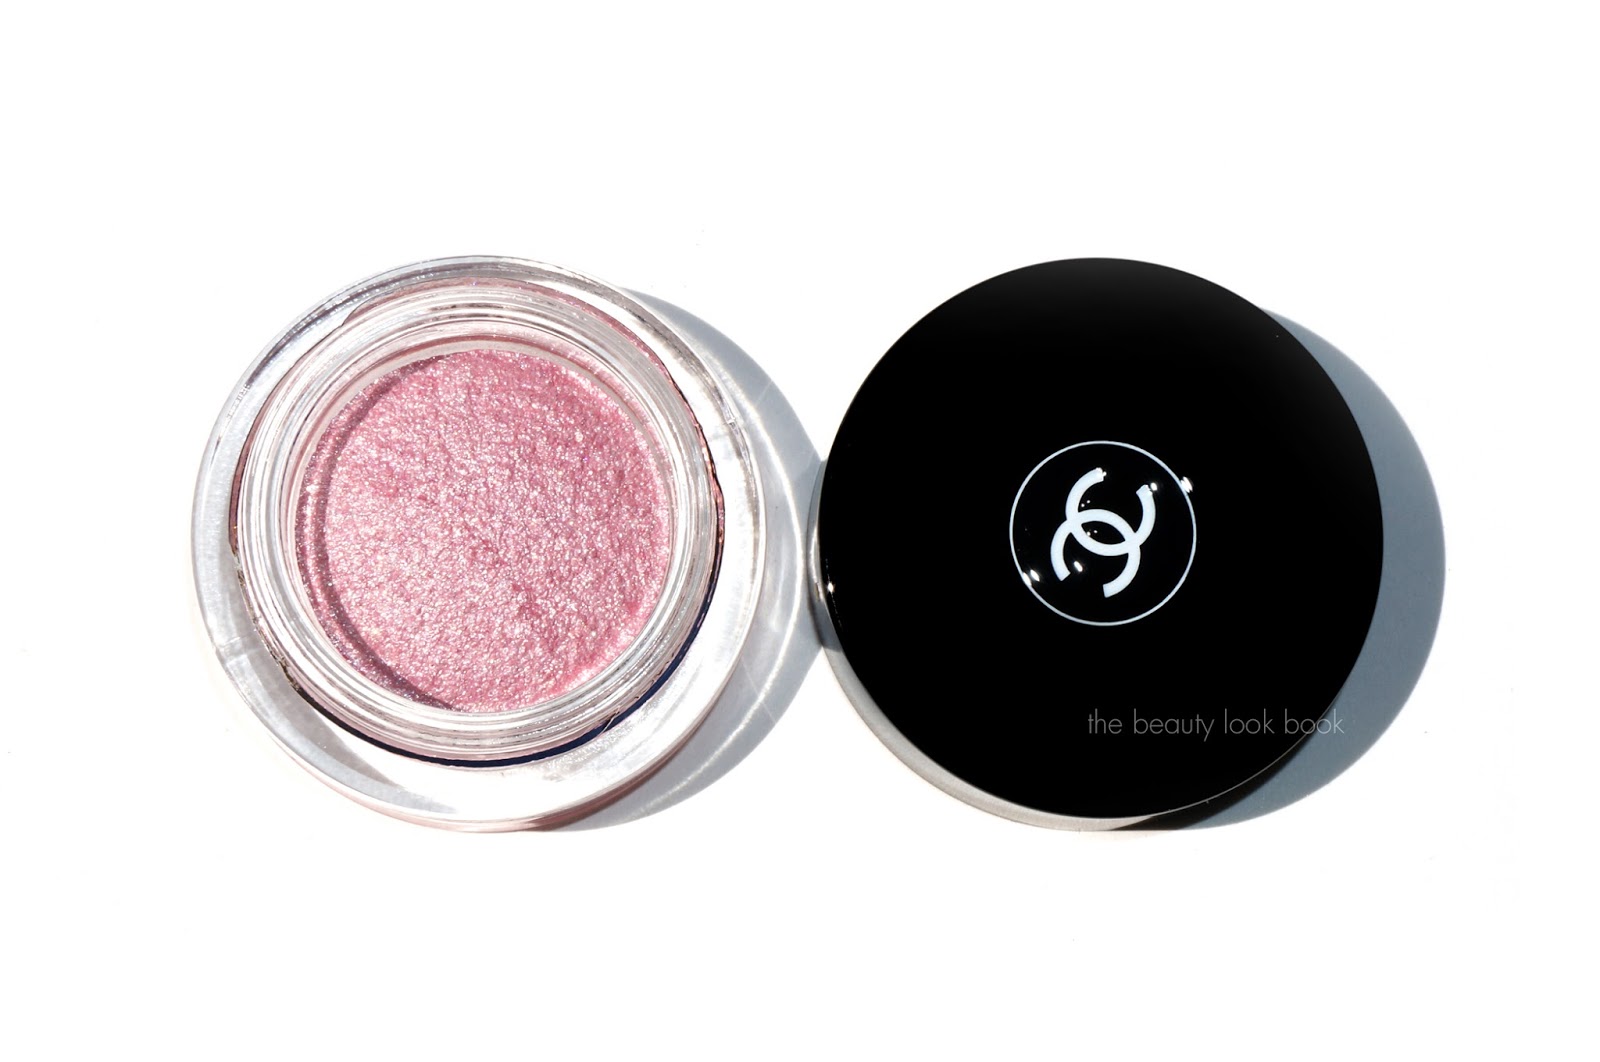 CHANEL Illusion d'Ombre in #88 Abstraction & #89 Vision – Summer